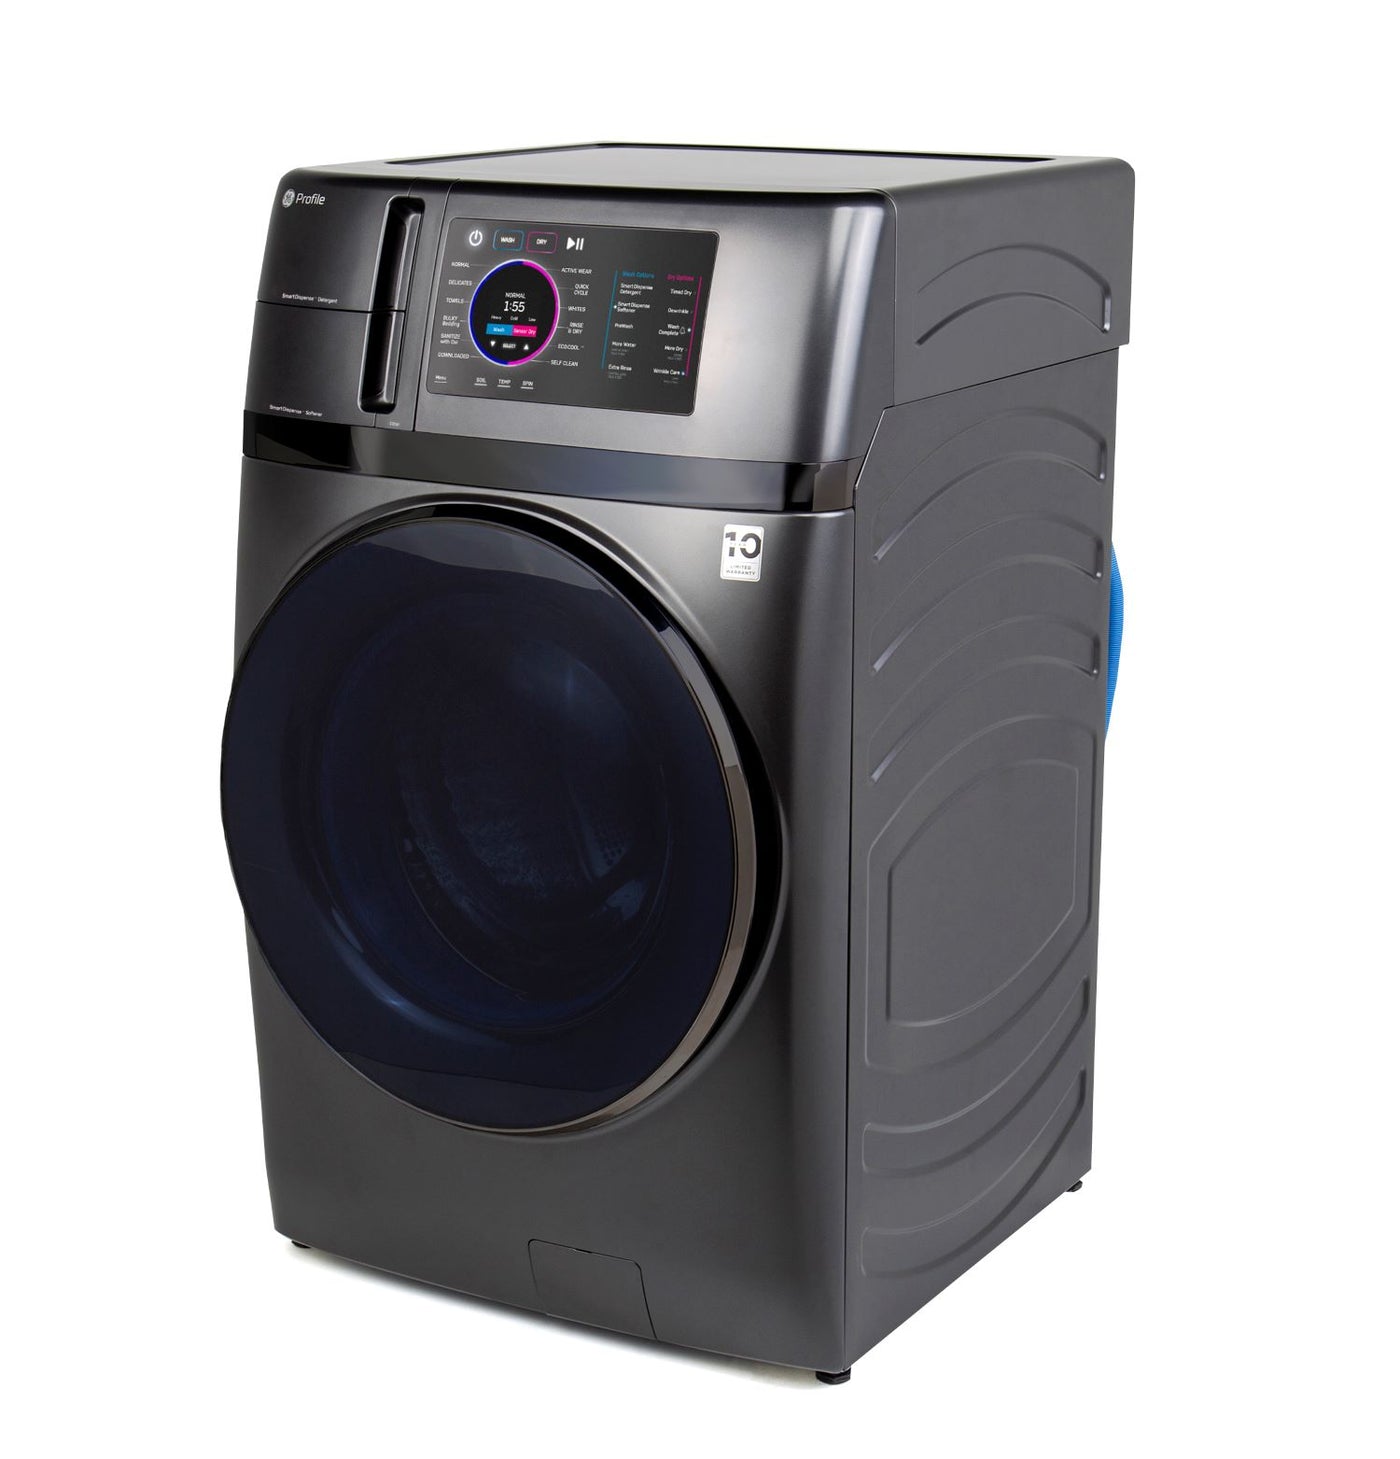 GE Profile Graphite 28" UltraFast All-in-One Washer/Dryer with Ventless Heat Pump (5.5 Cu.Ft.)- PFQ97HSPVDS